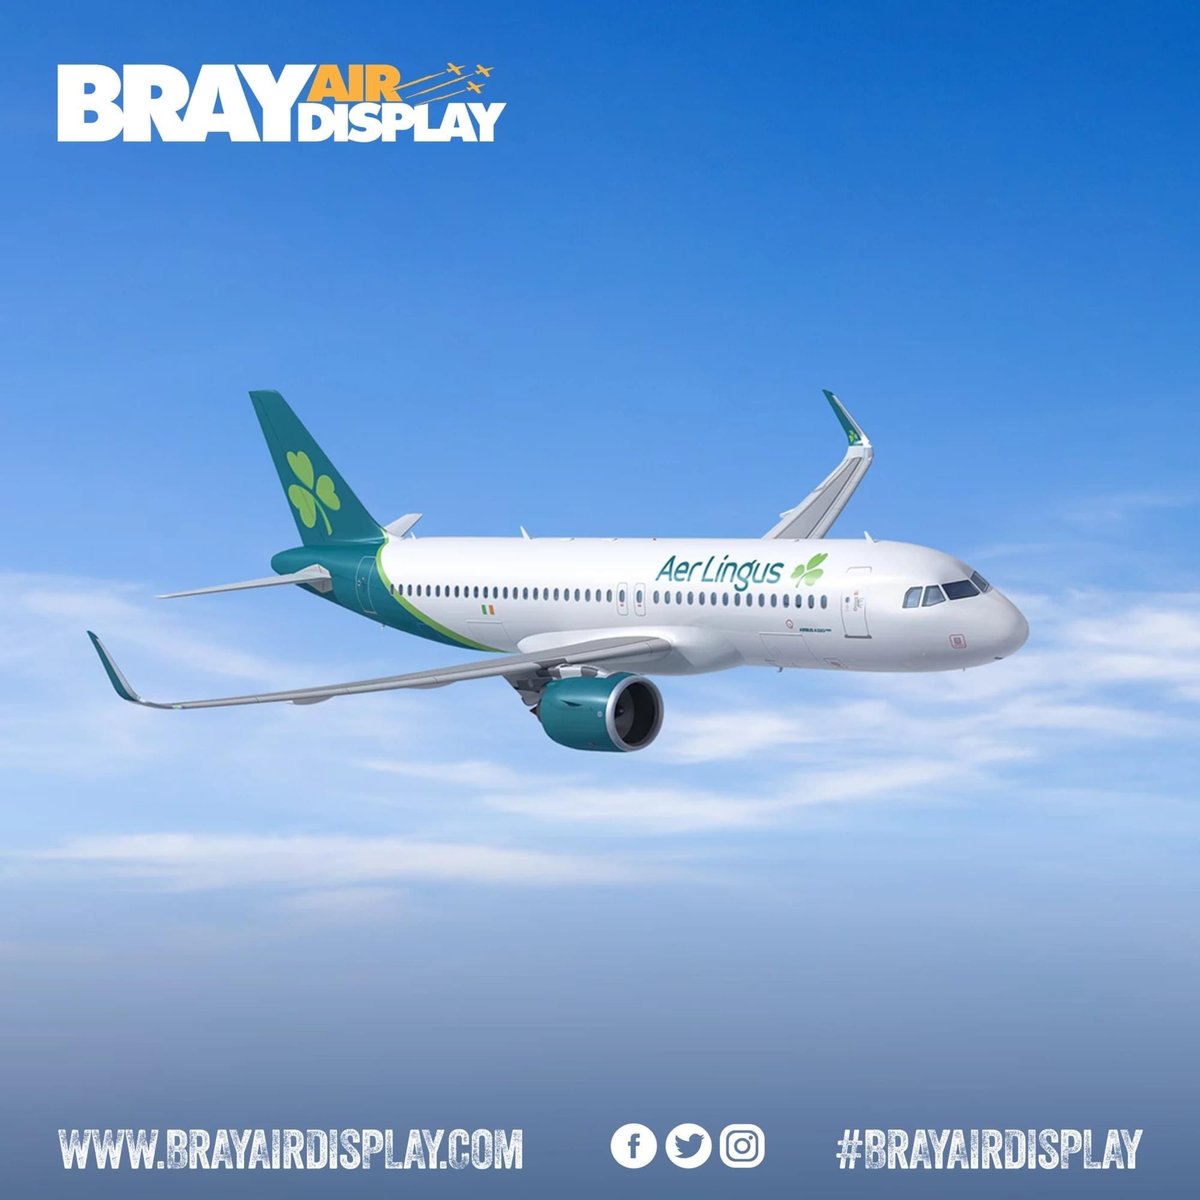 7 more days until we see this brand new @AerLingus Airbus A320 NEO entertain the crowds at the @BrayAirShow 😃 Download the free airshow brochure here: zurl.co/DxmK 

📅 #BrayAirDisplay | July 29 & July 30 from 3pm

#BrayAirDisplay #SummerInBray #LoveBray #Heli60